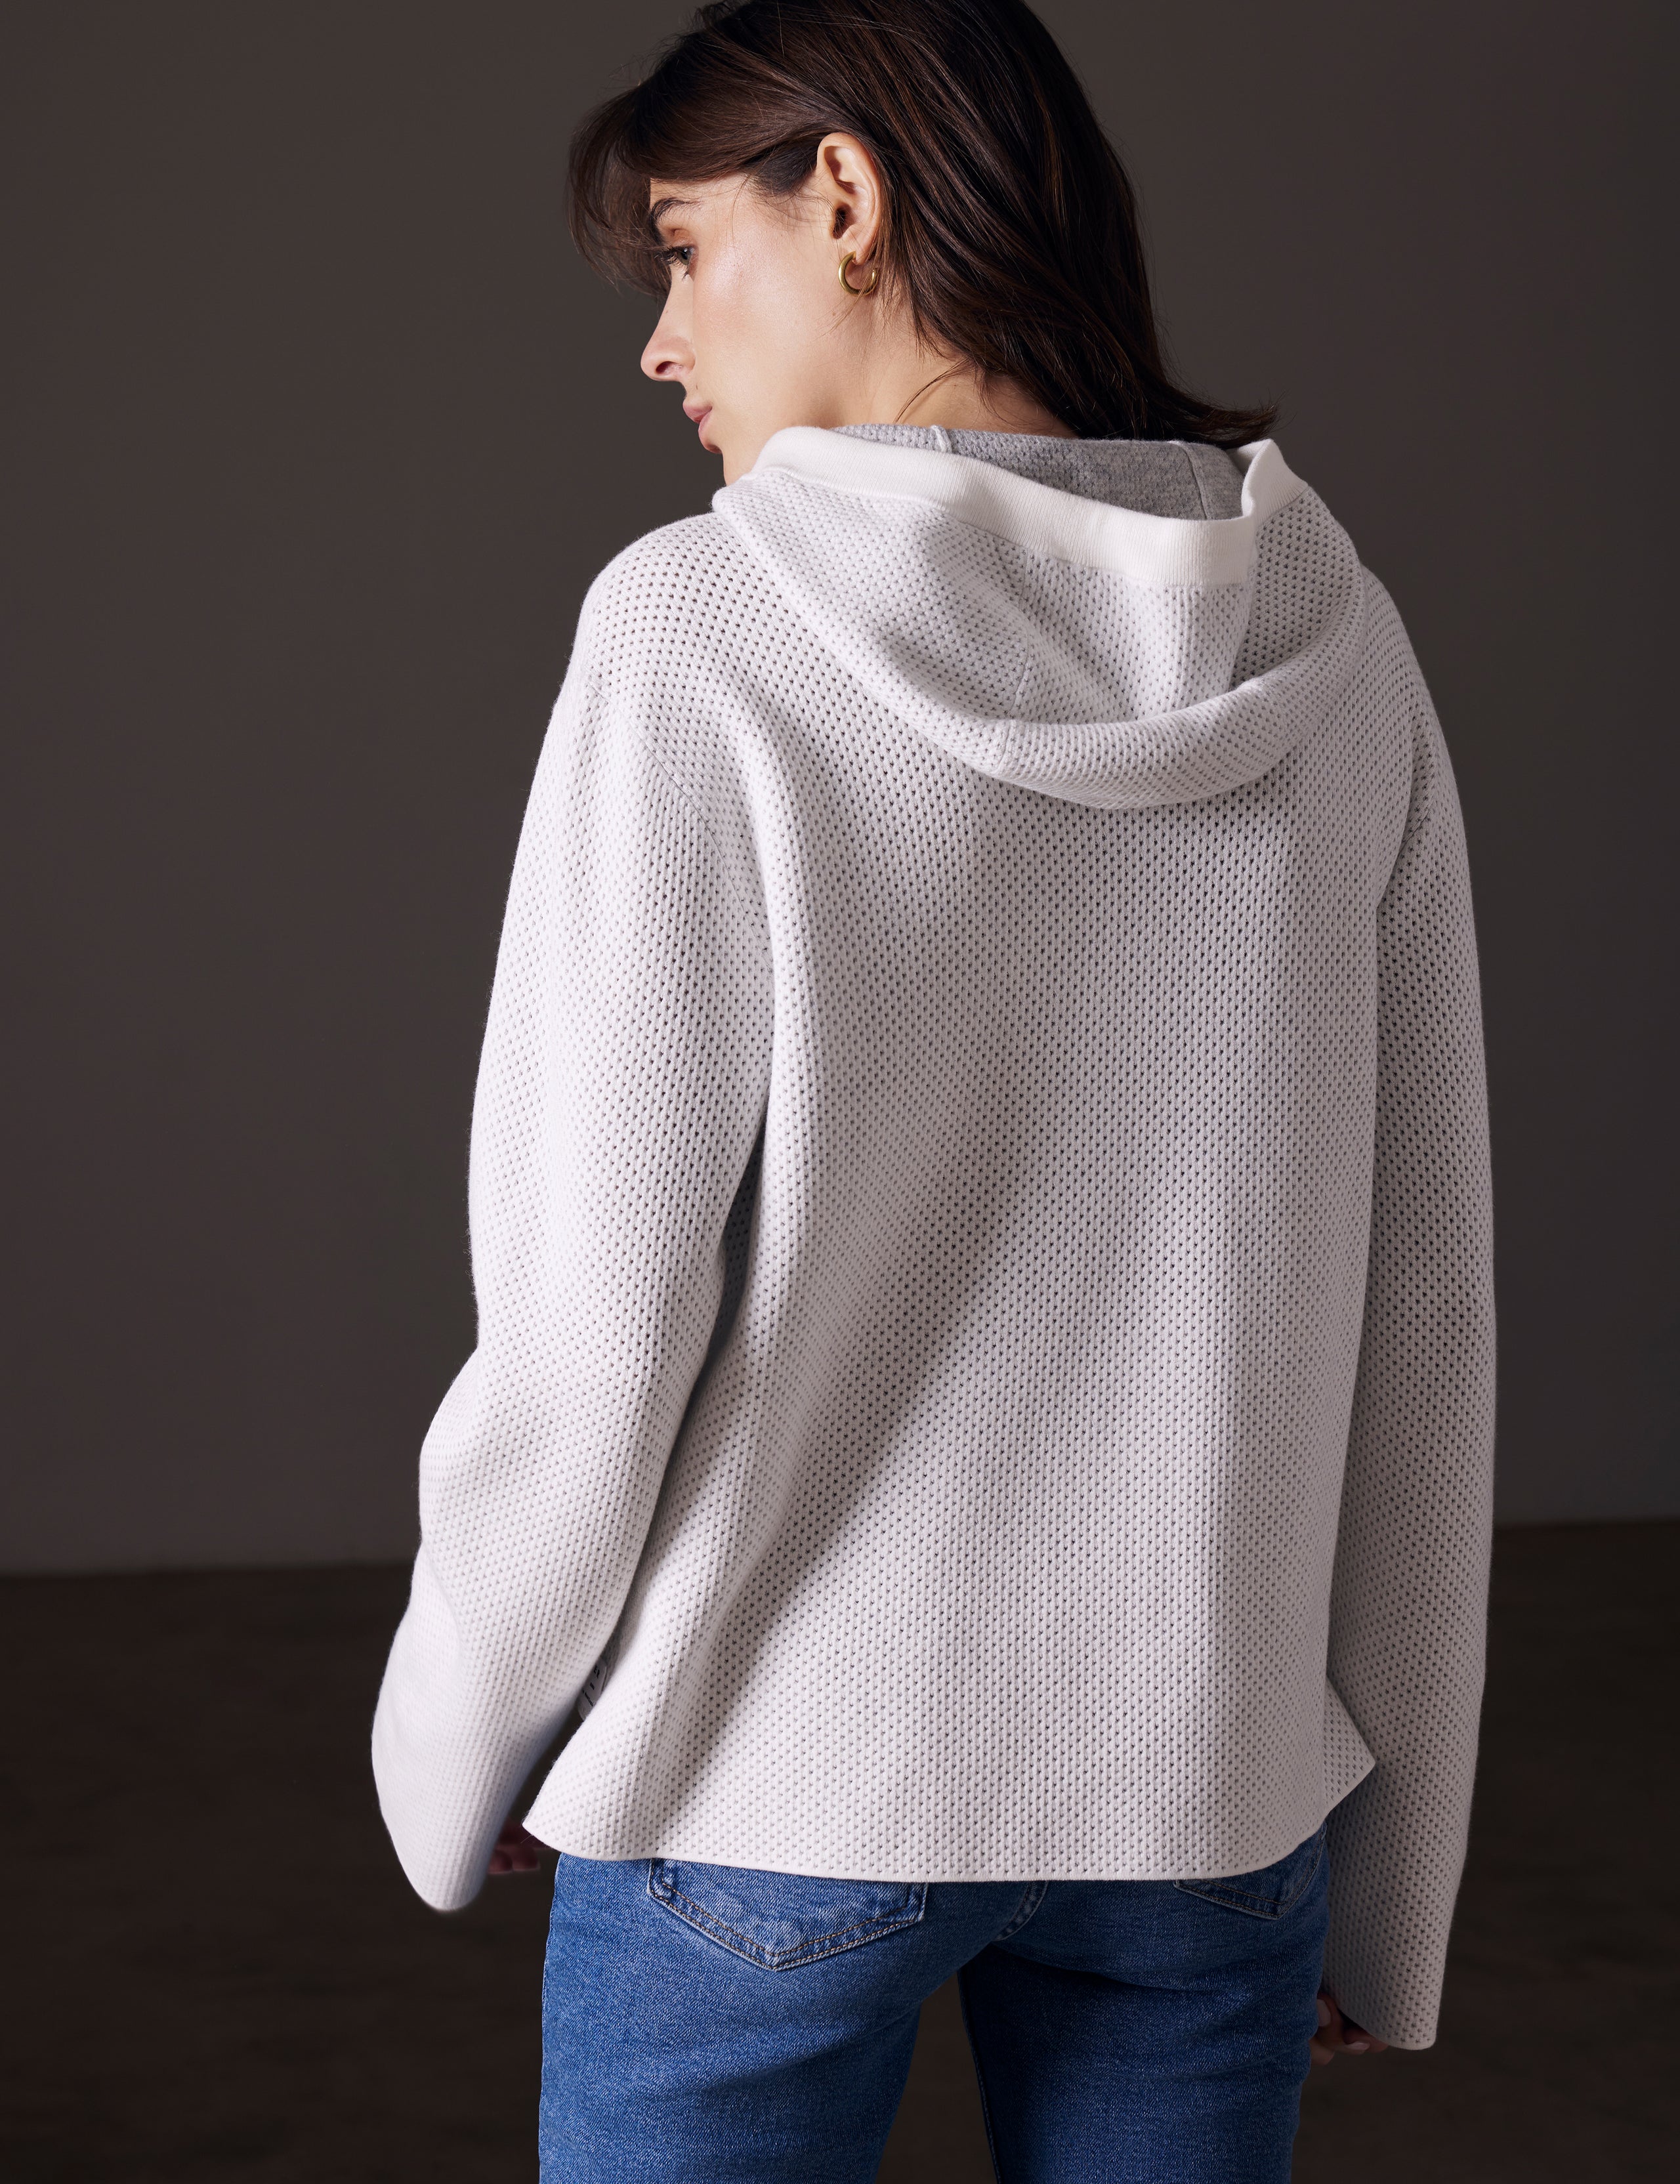 back view of woman wearing beige sweater from AETHER Apparel